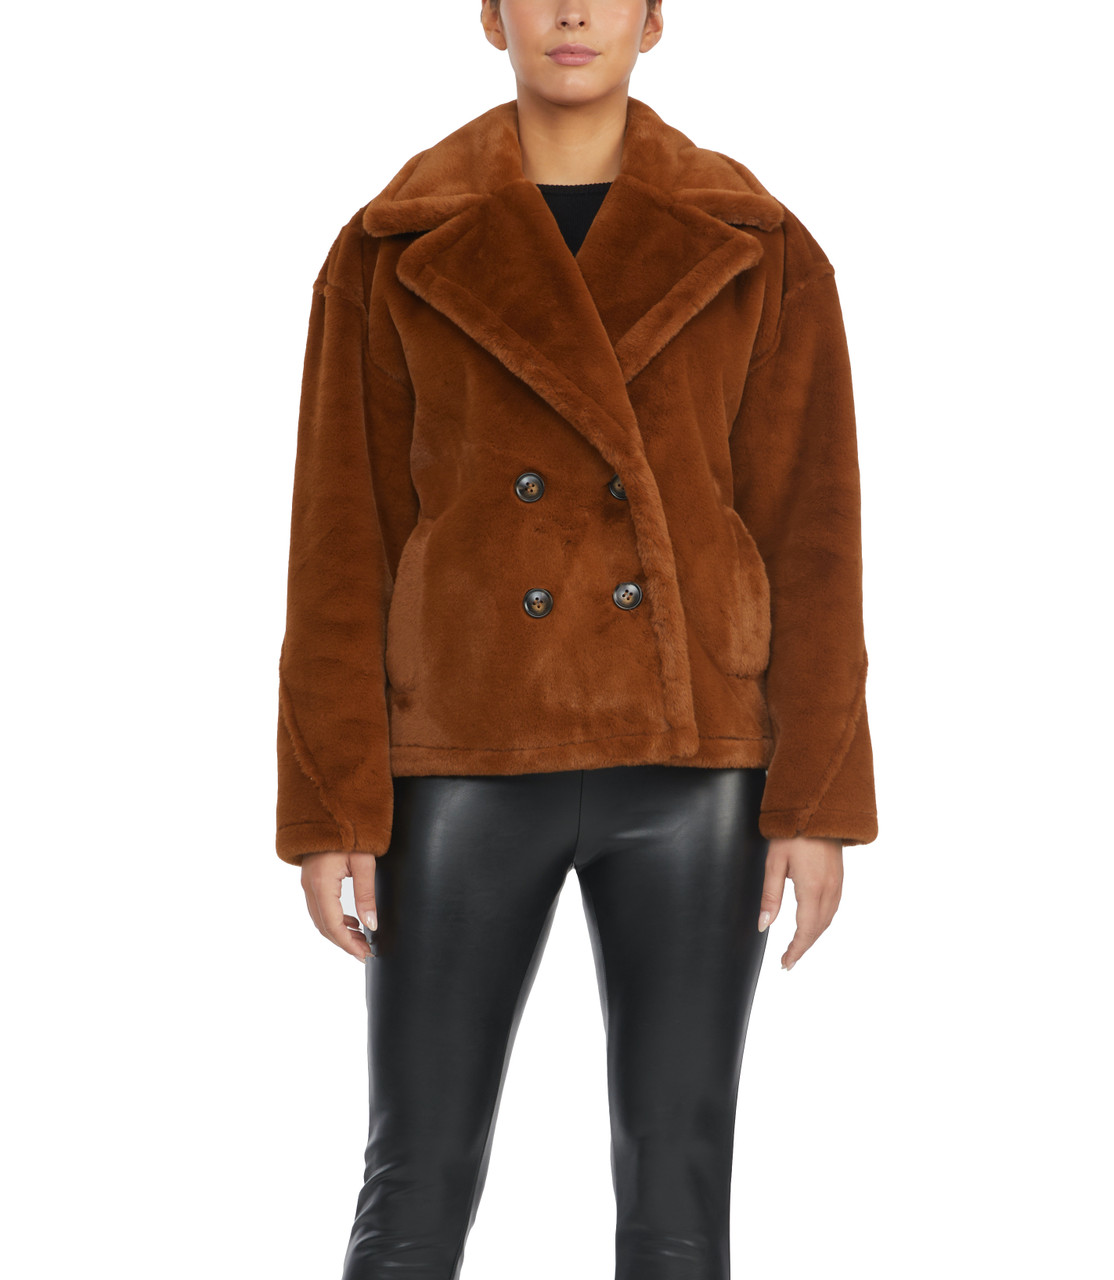 Topshop Petite Faux Leather Shearling Aviator Biker Jacket In Off  White-Brown for Women